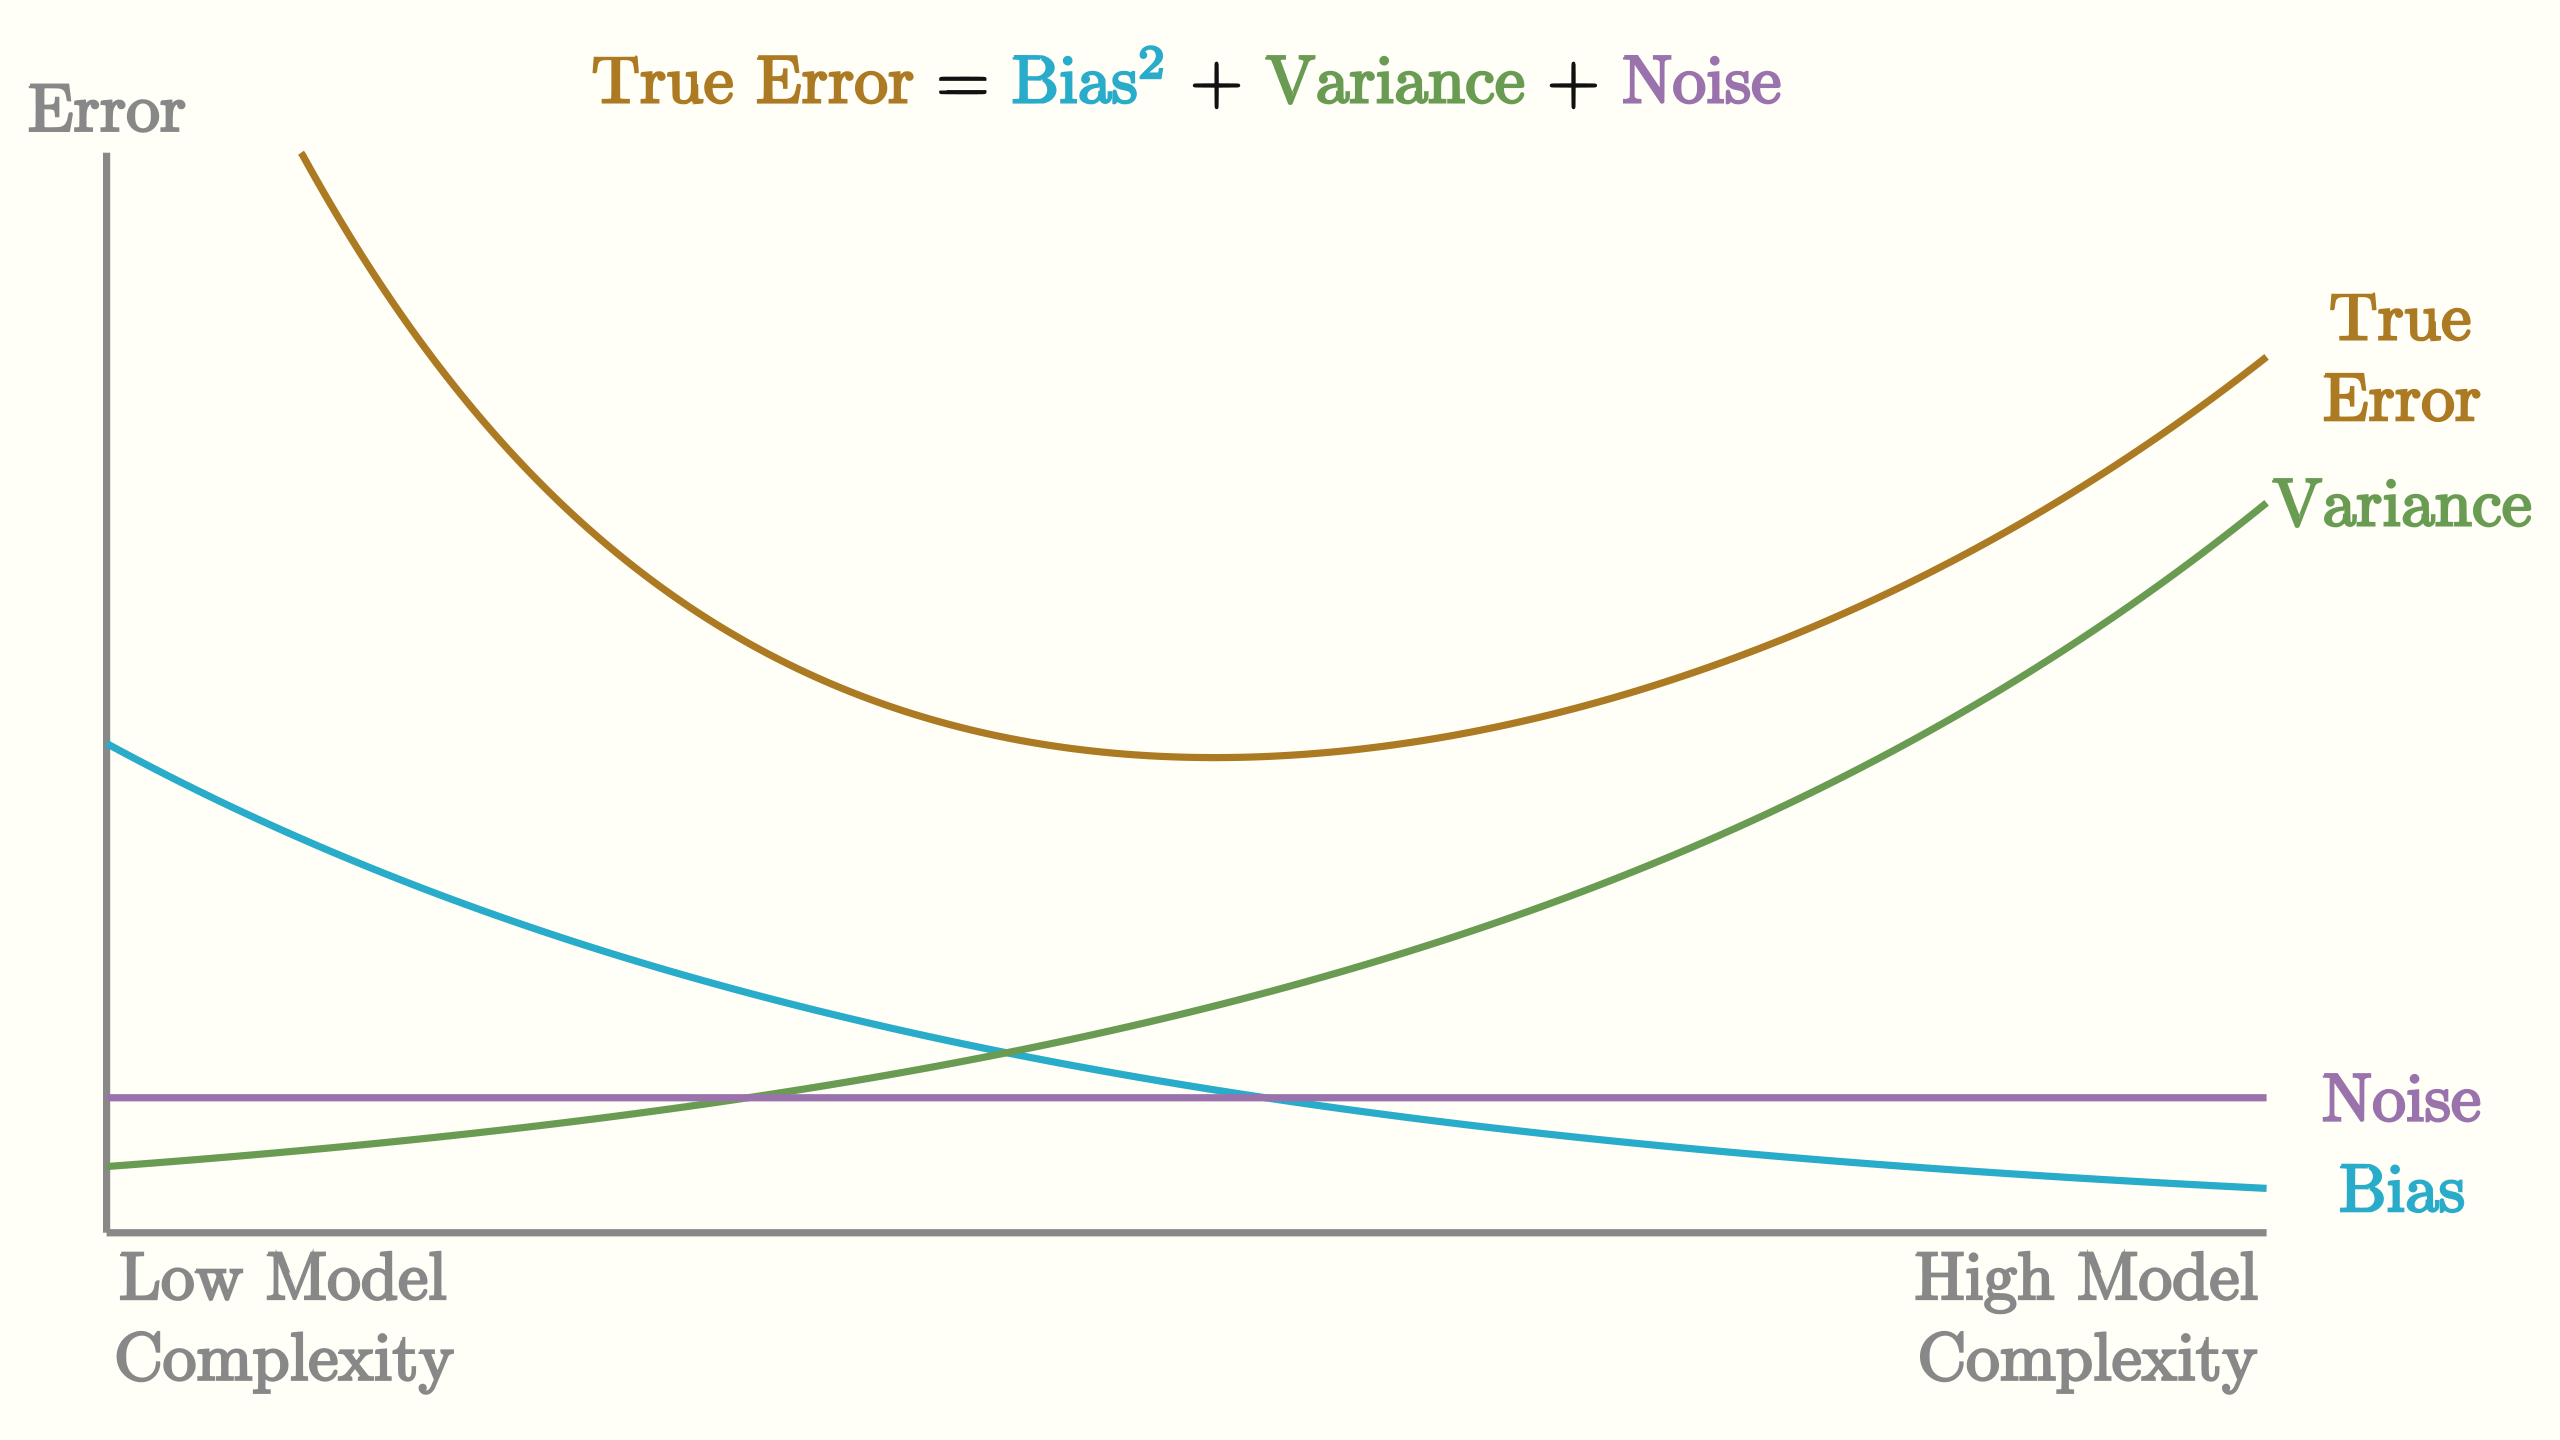 Bias variance tradeoff with idealized curves